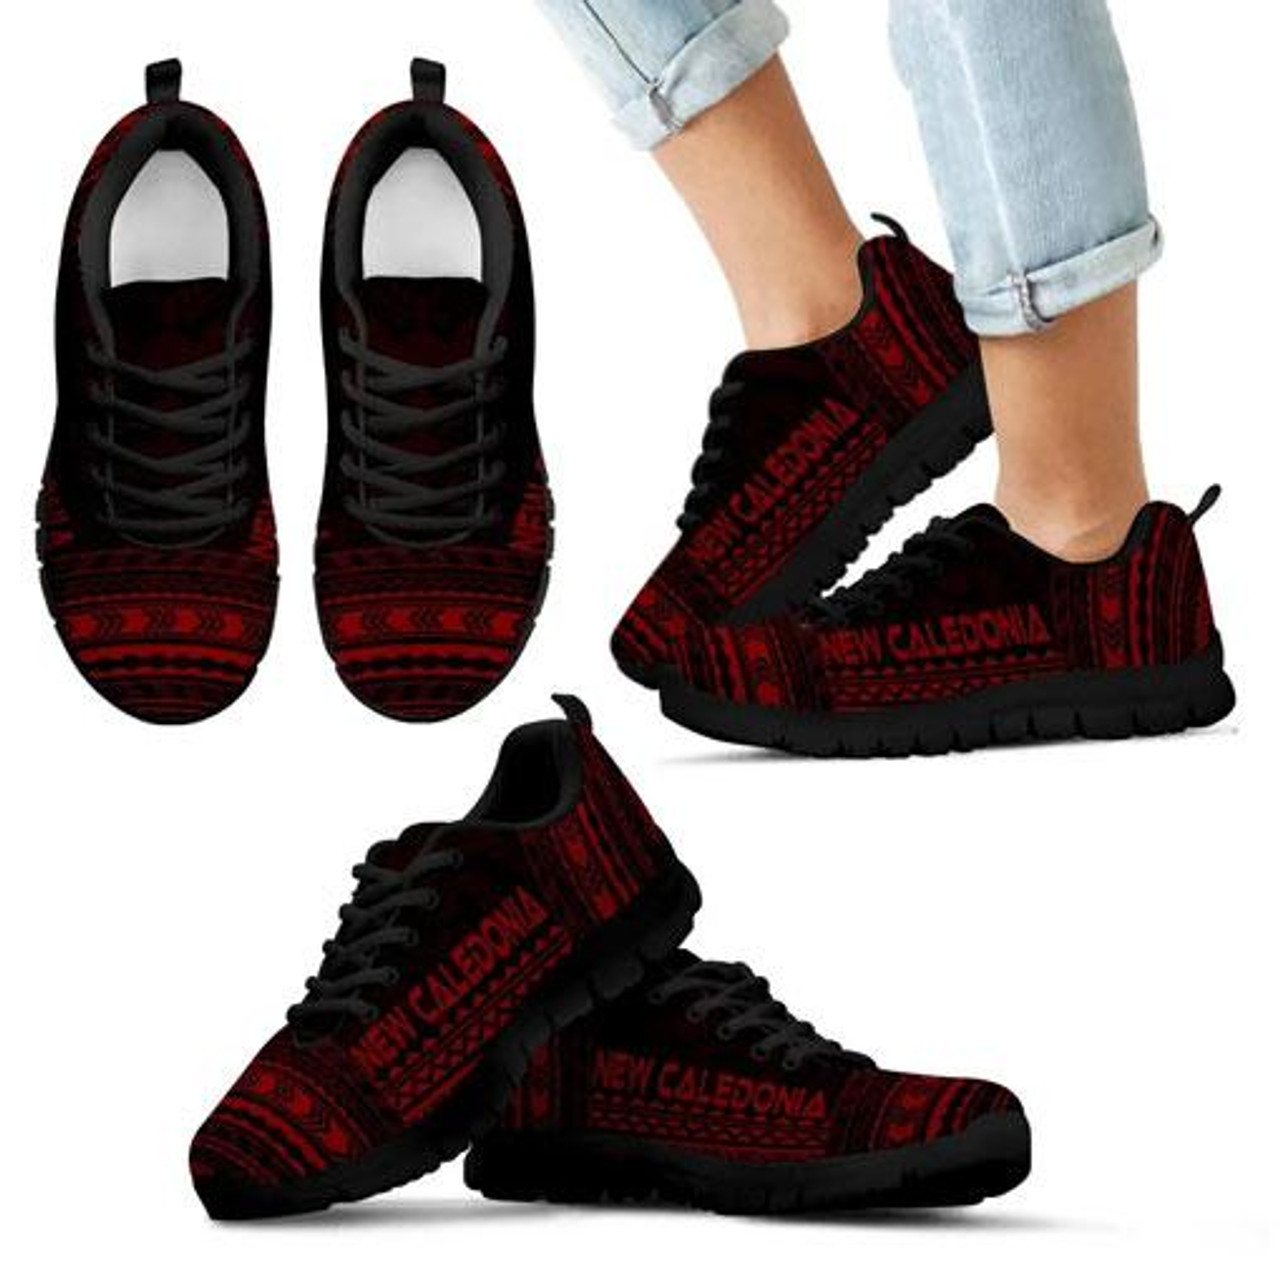 New Caledonia Sneakers - New Caledonia Polynesian Chief Tattoo Deep Red Version 6